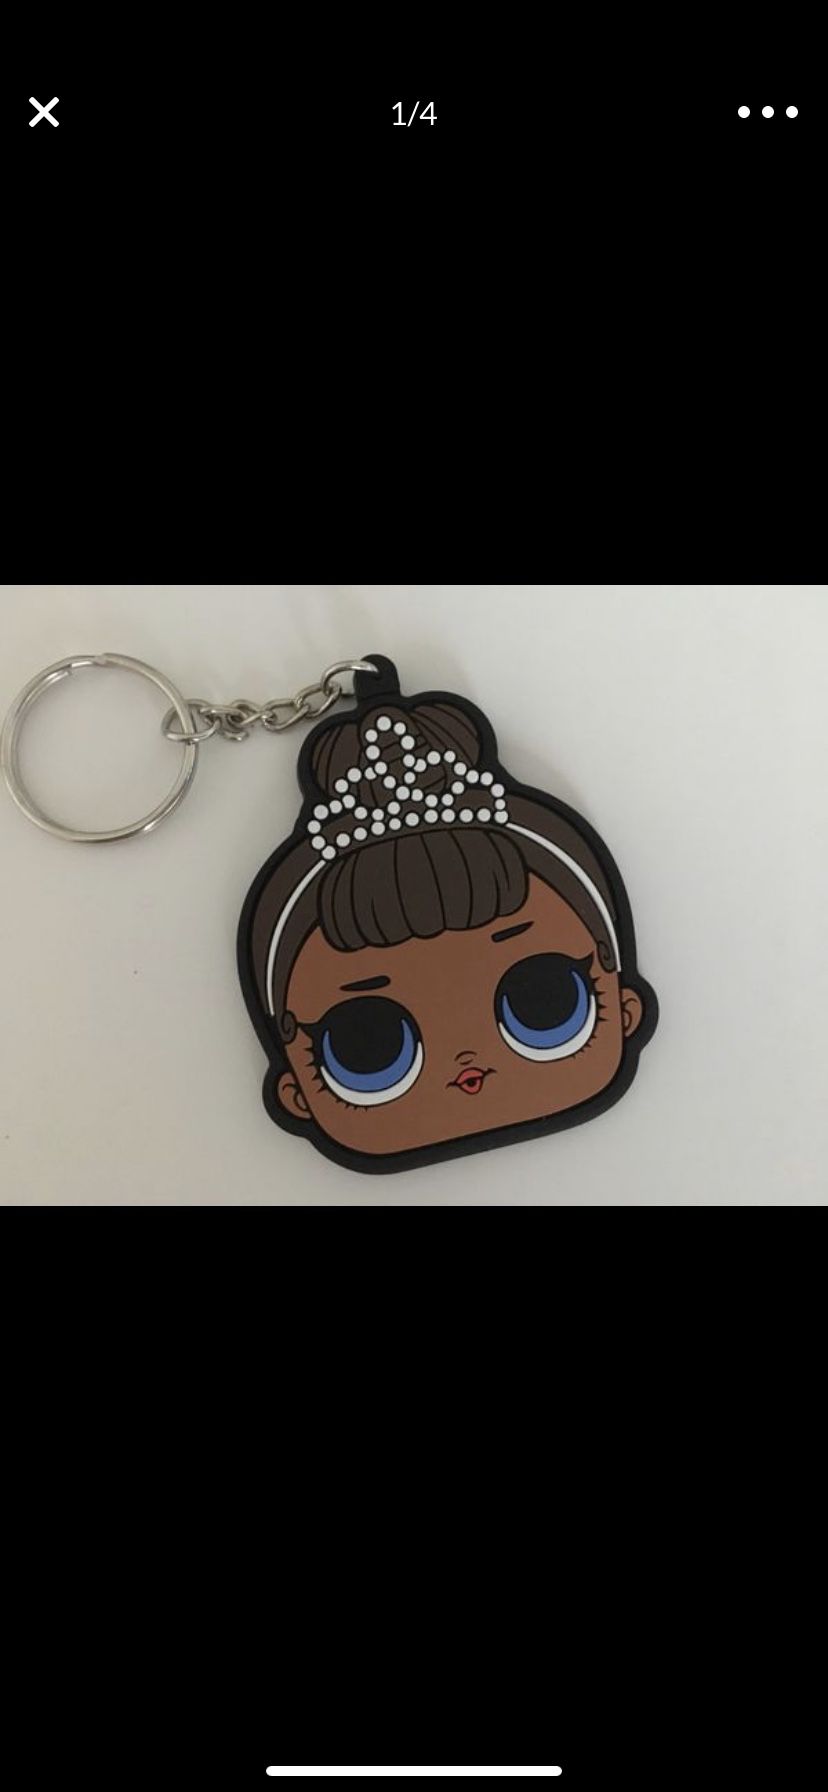 Miss baby lol doll surprise key chain